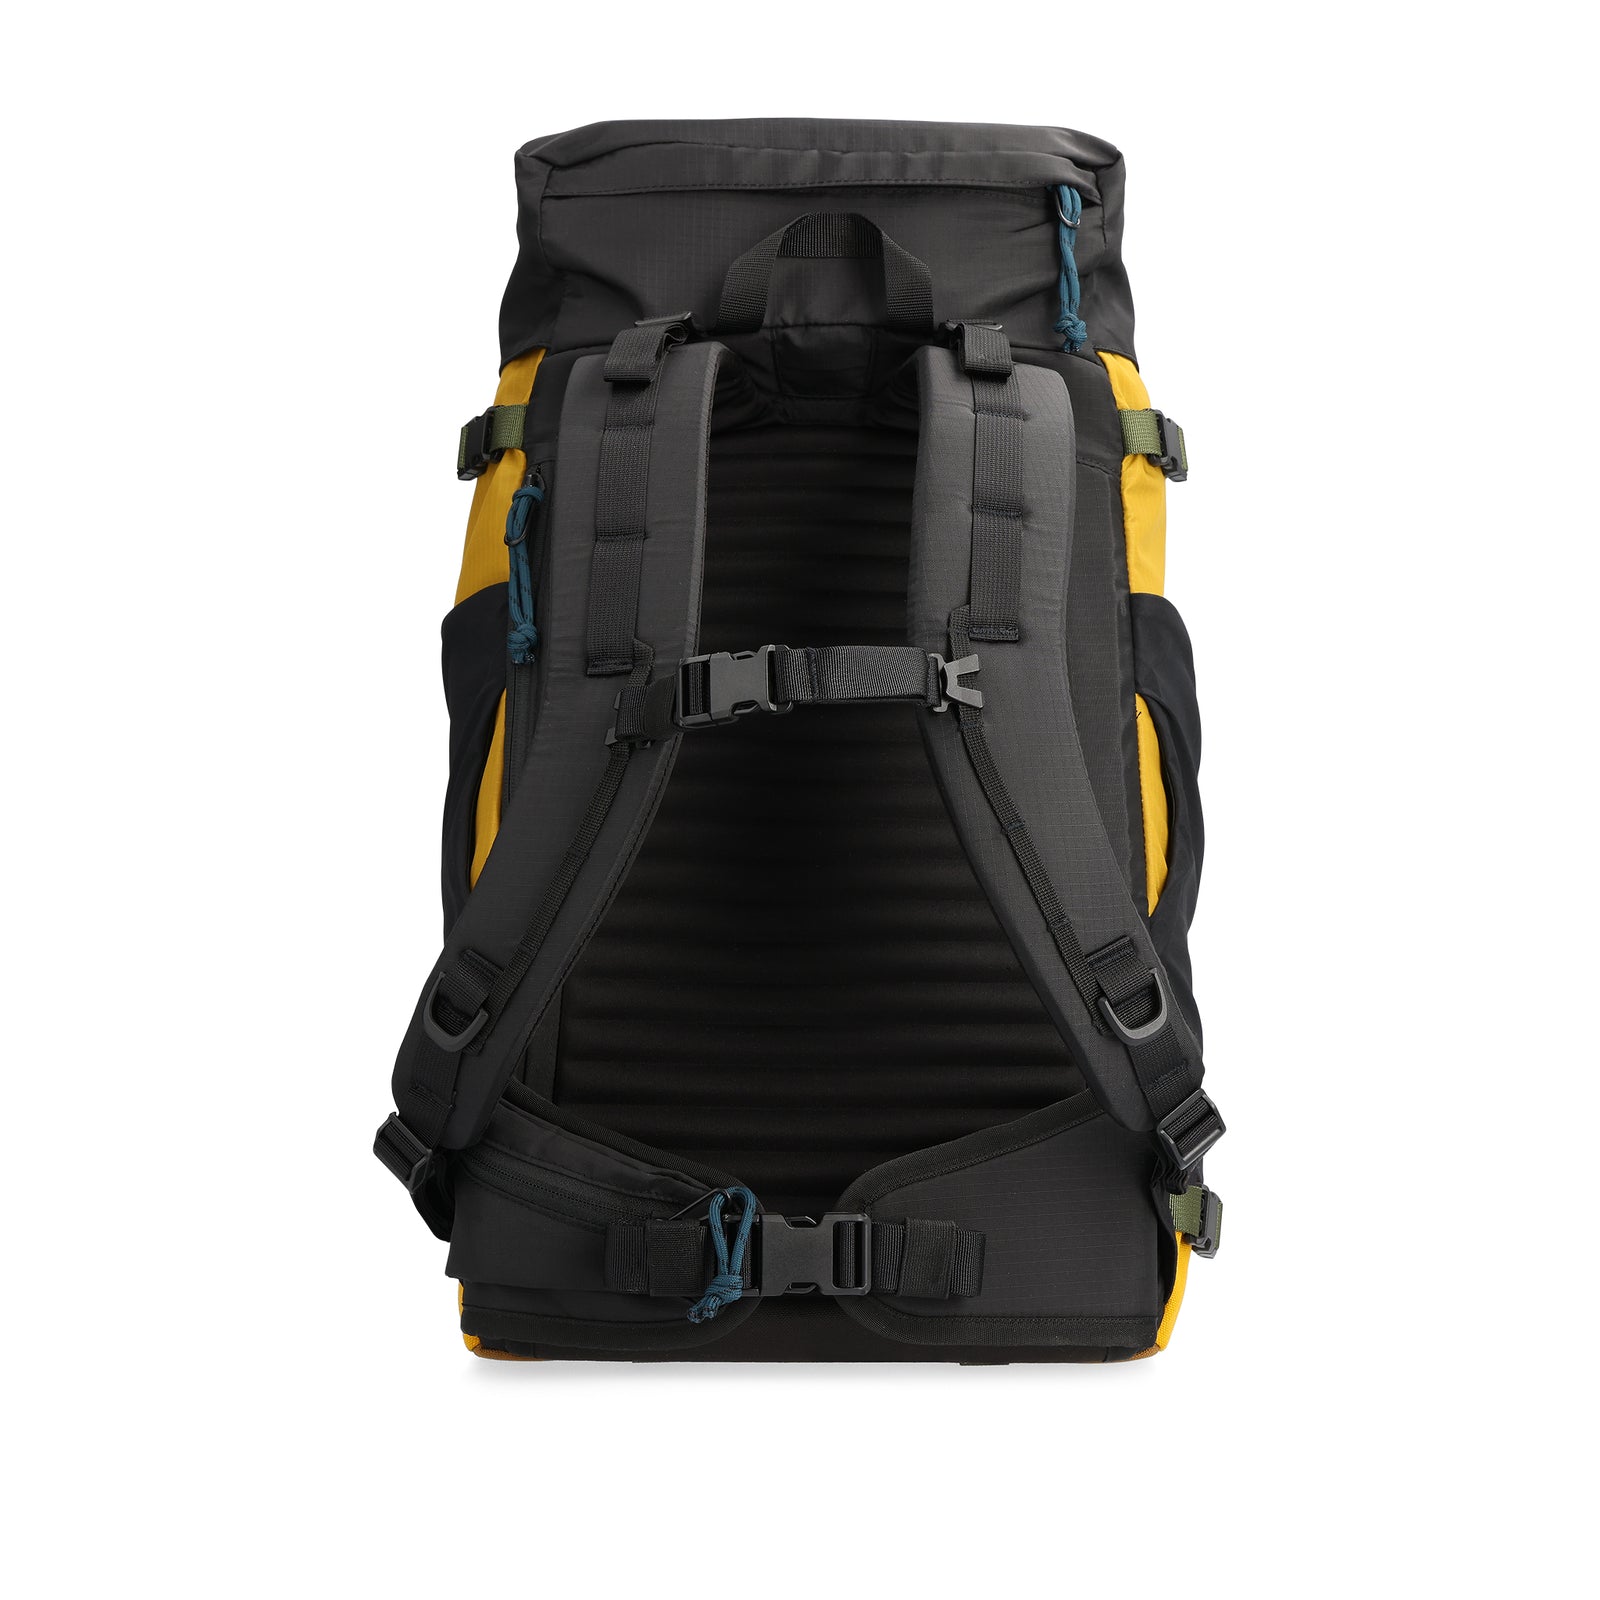 Back View of Topo Designs Mountain Pack 28L in "Mustard / Black"